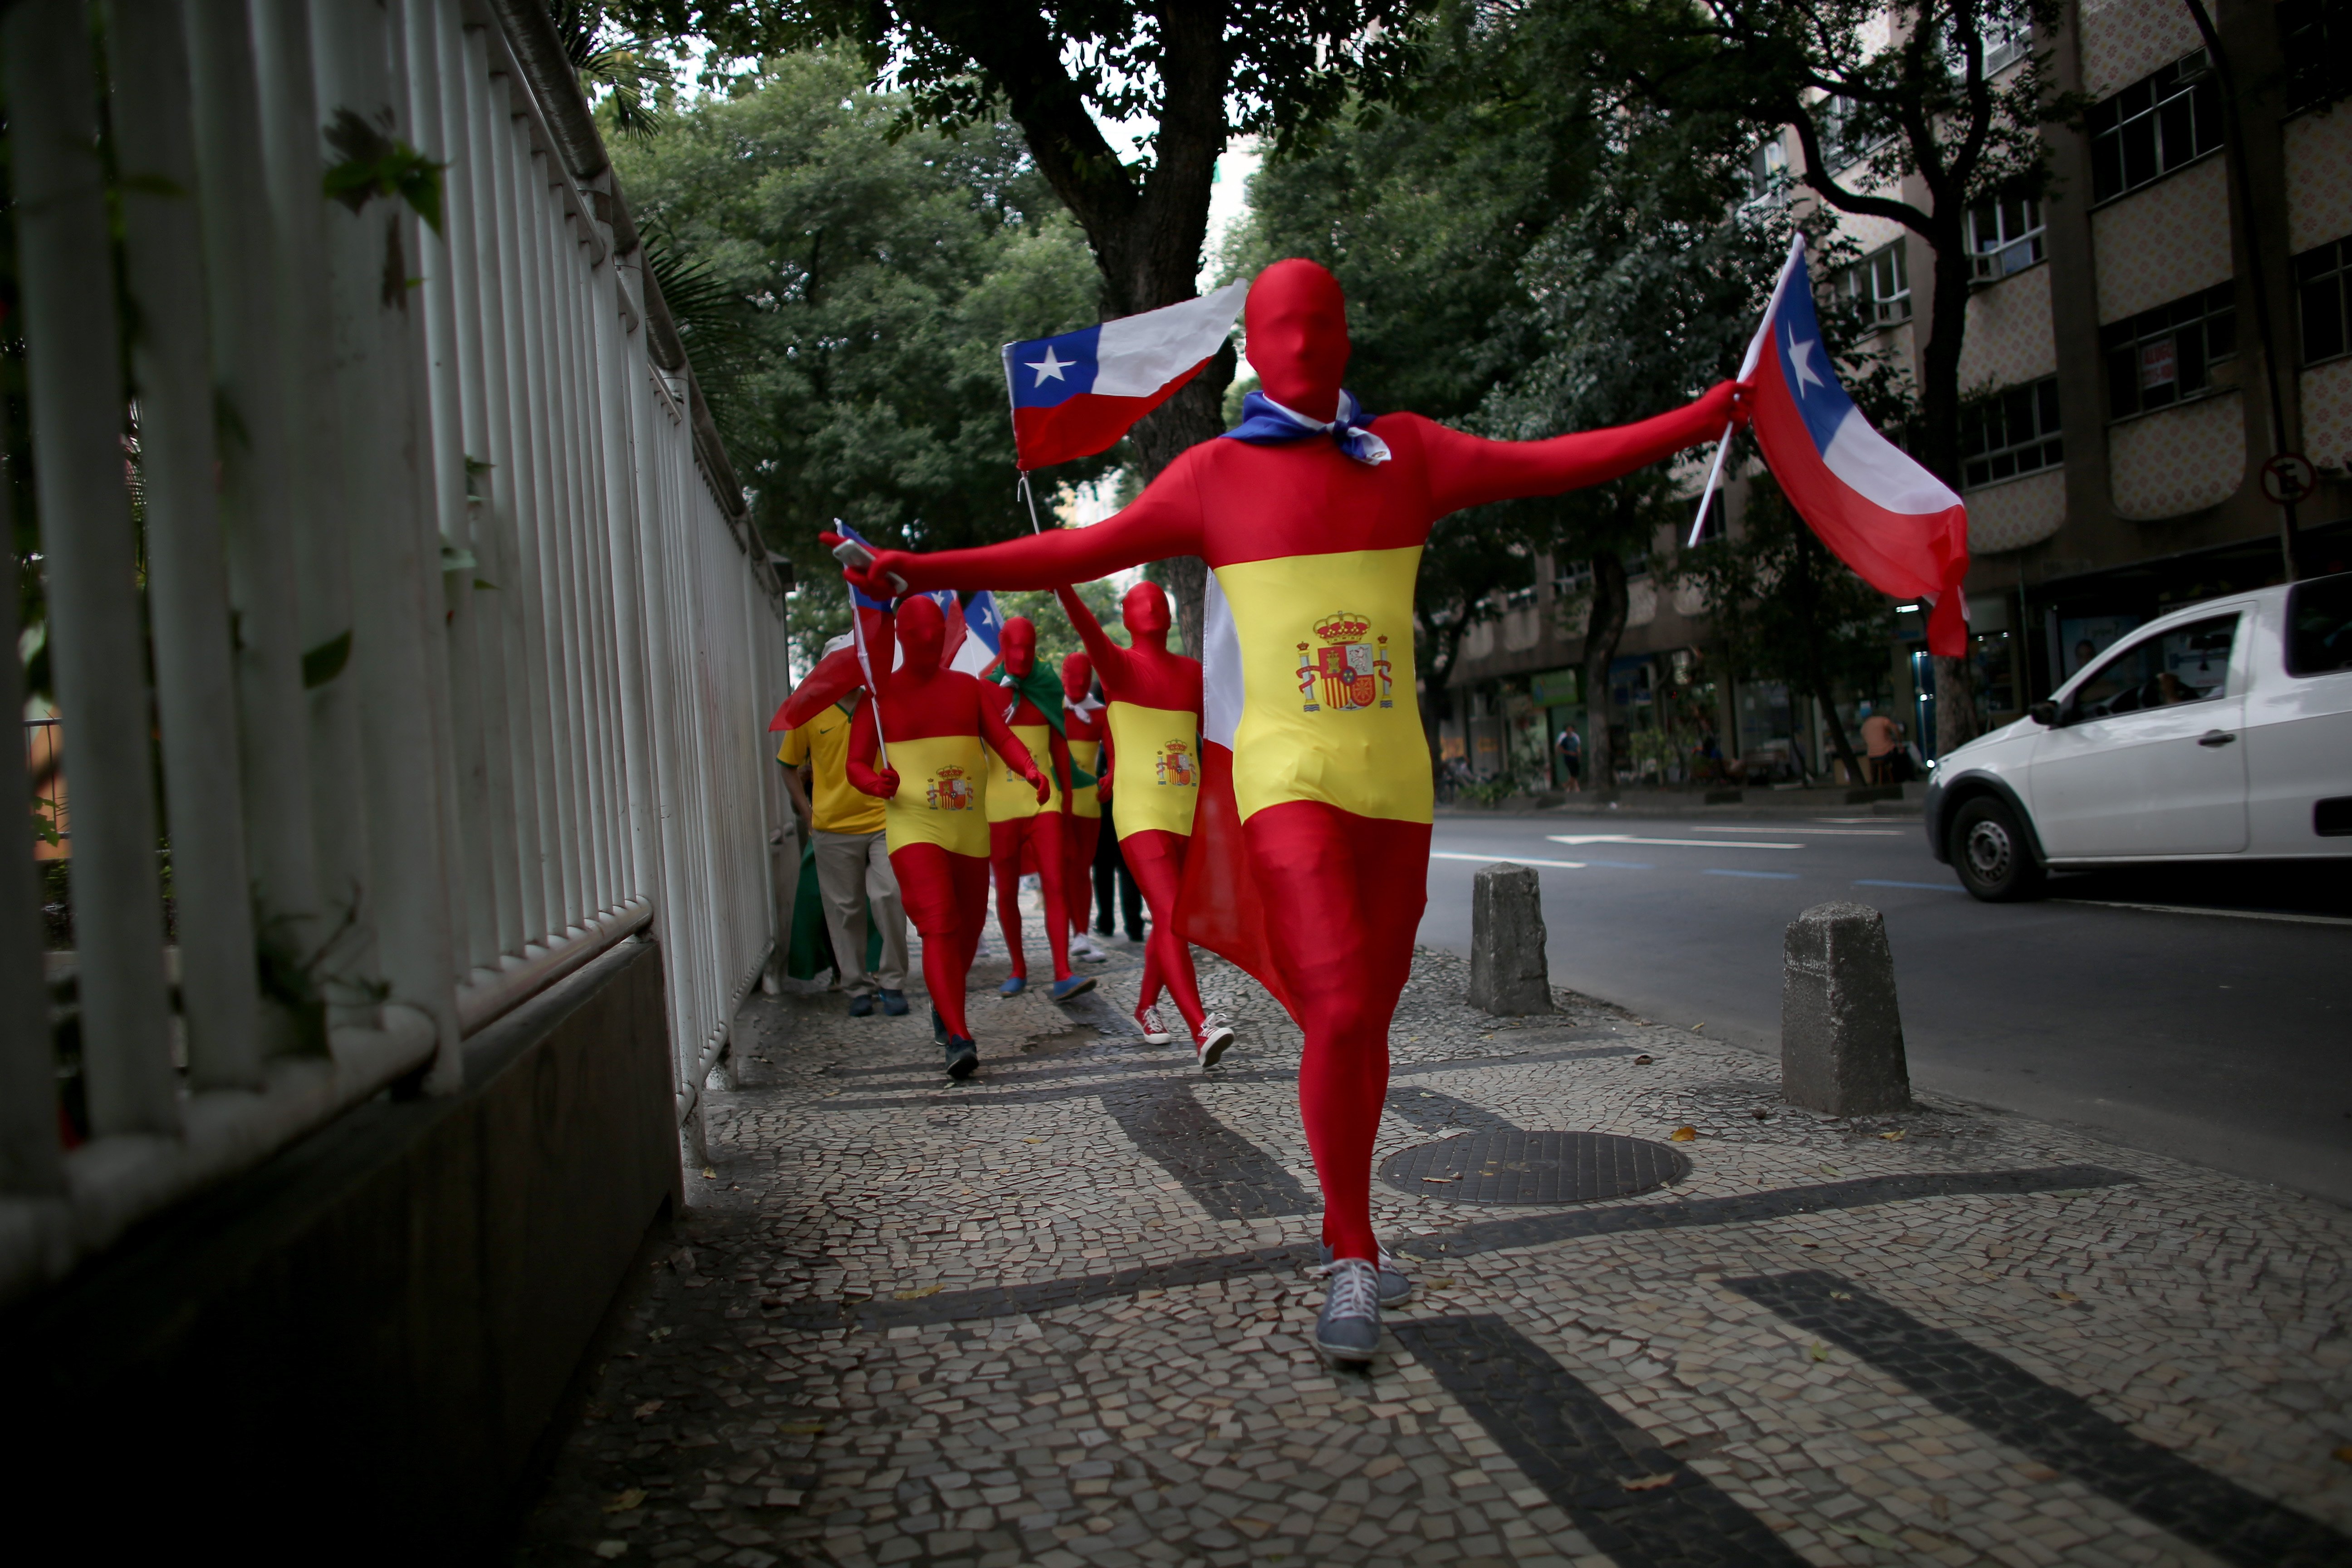 A group of Chilean soccer team fans walk through the streets as they wait for their team to play Spain during the FIFA World Cup tournament on June 18, 2014 in Rio de Janeiro.